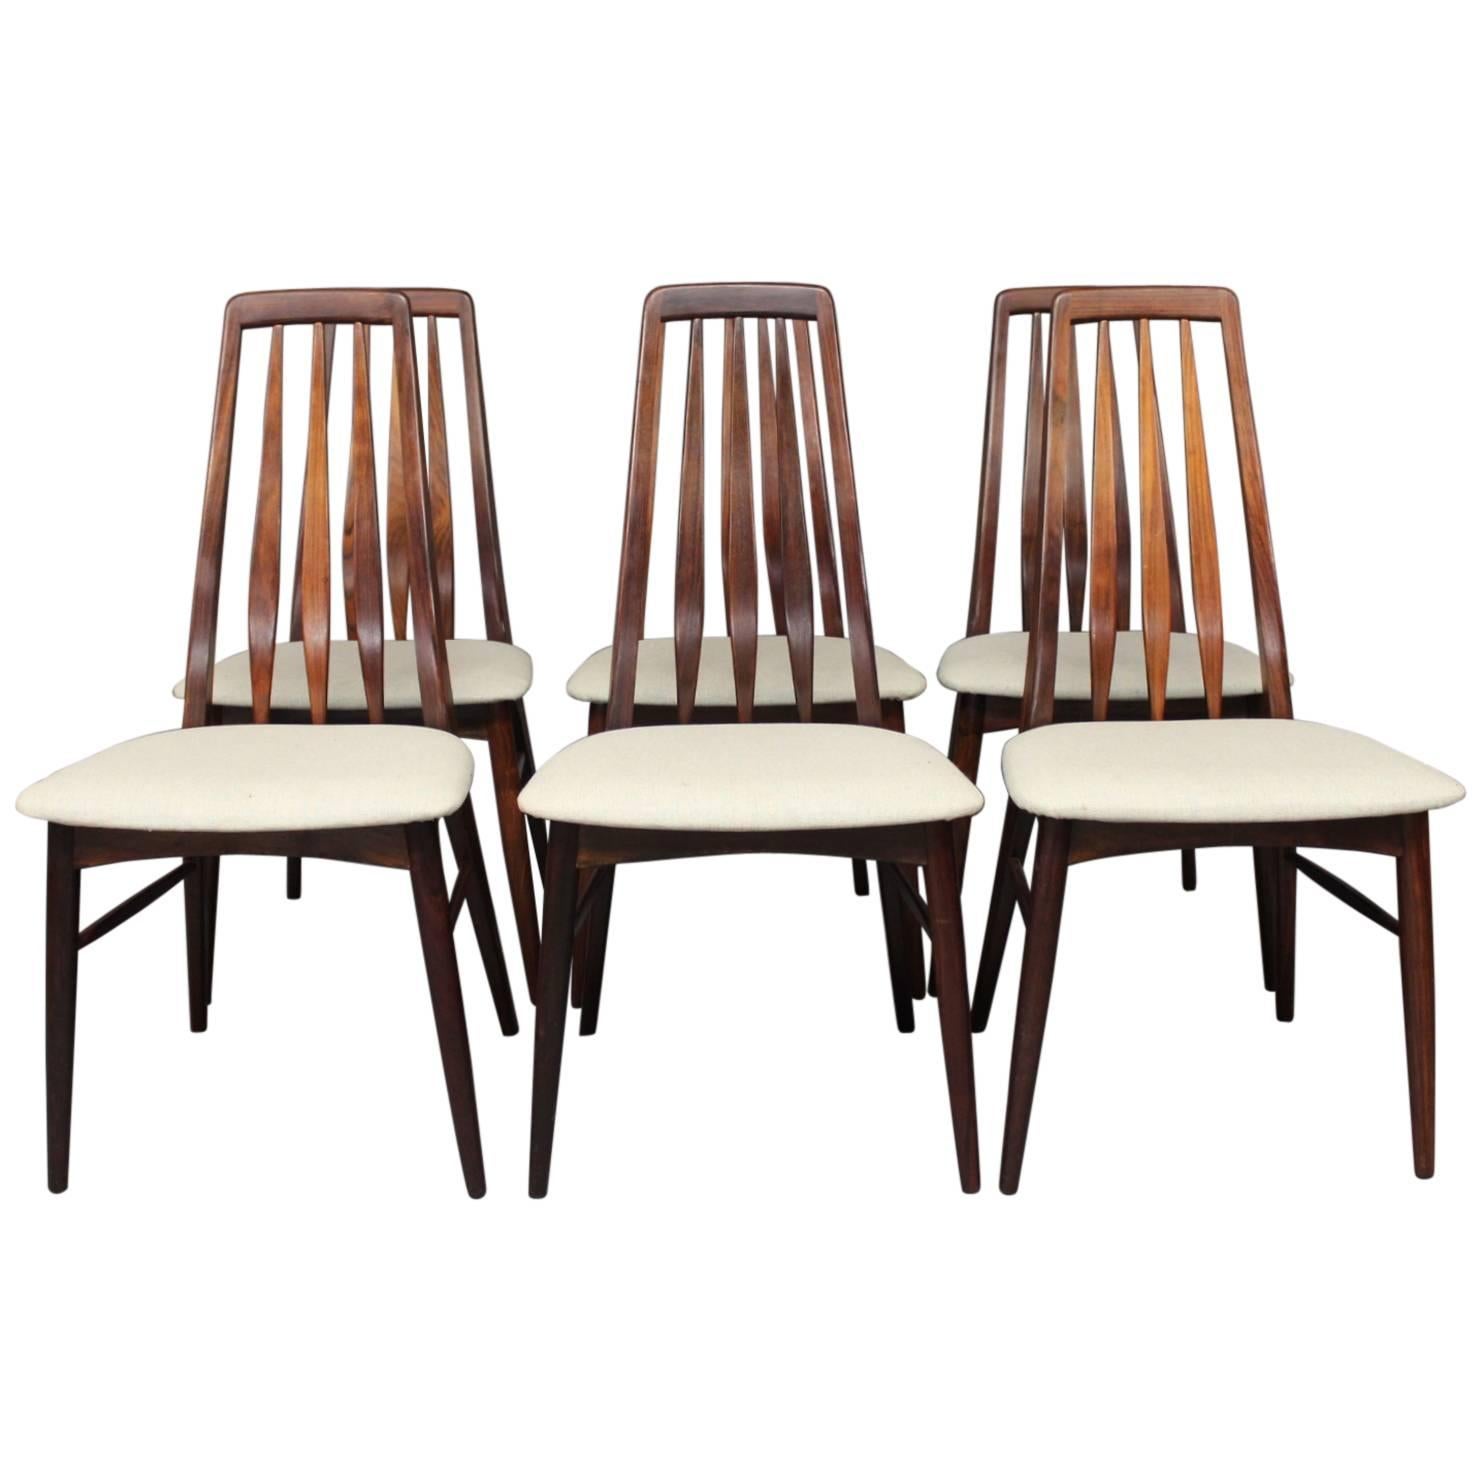 Set of Six "Eva" Dining Room Chairs by Niels Koefoed, 1960s